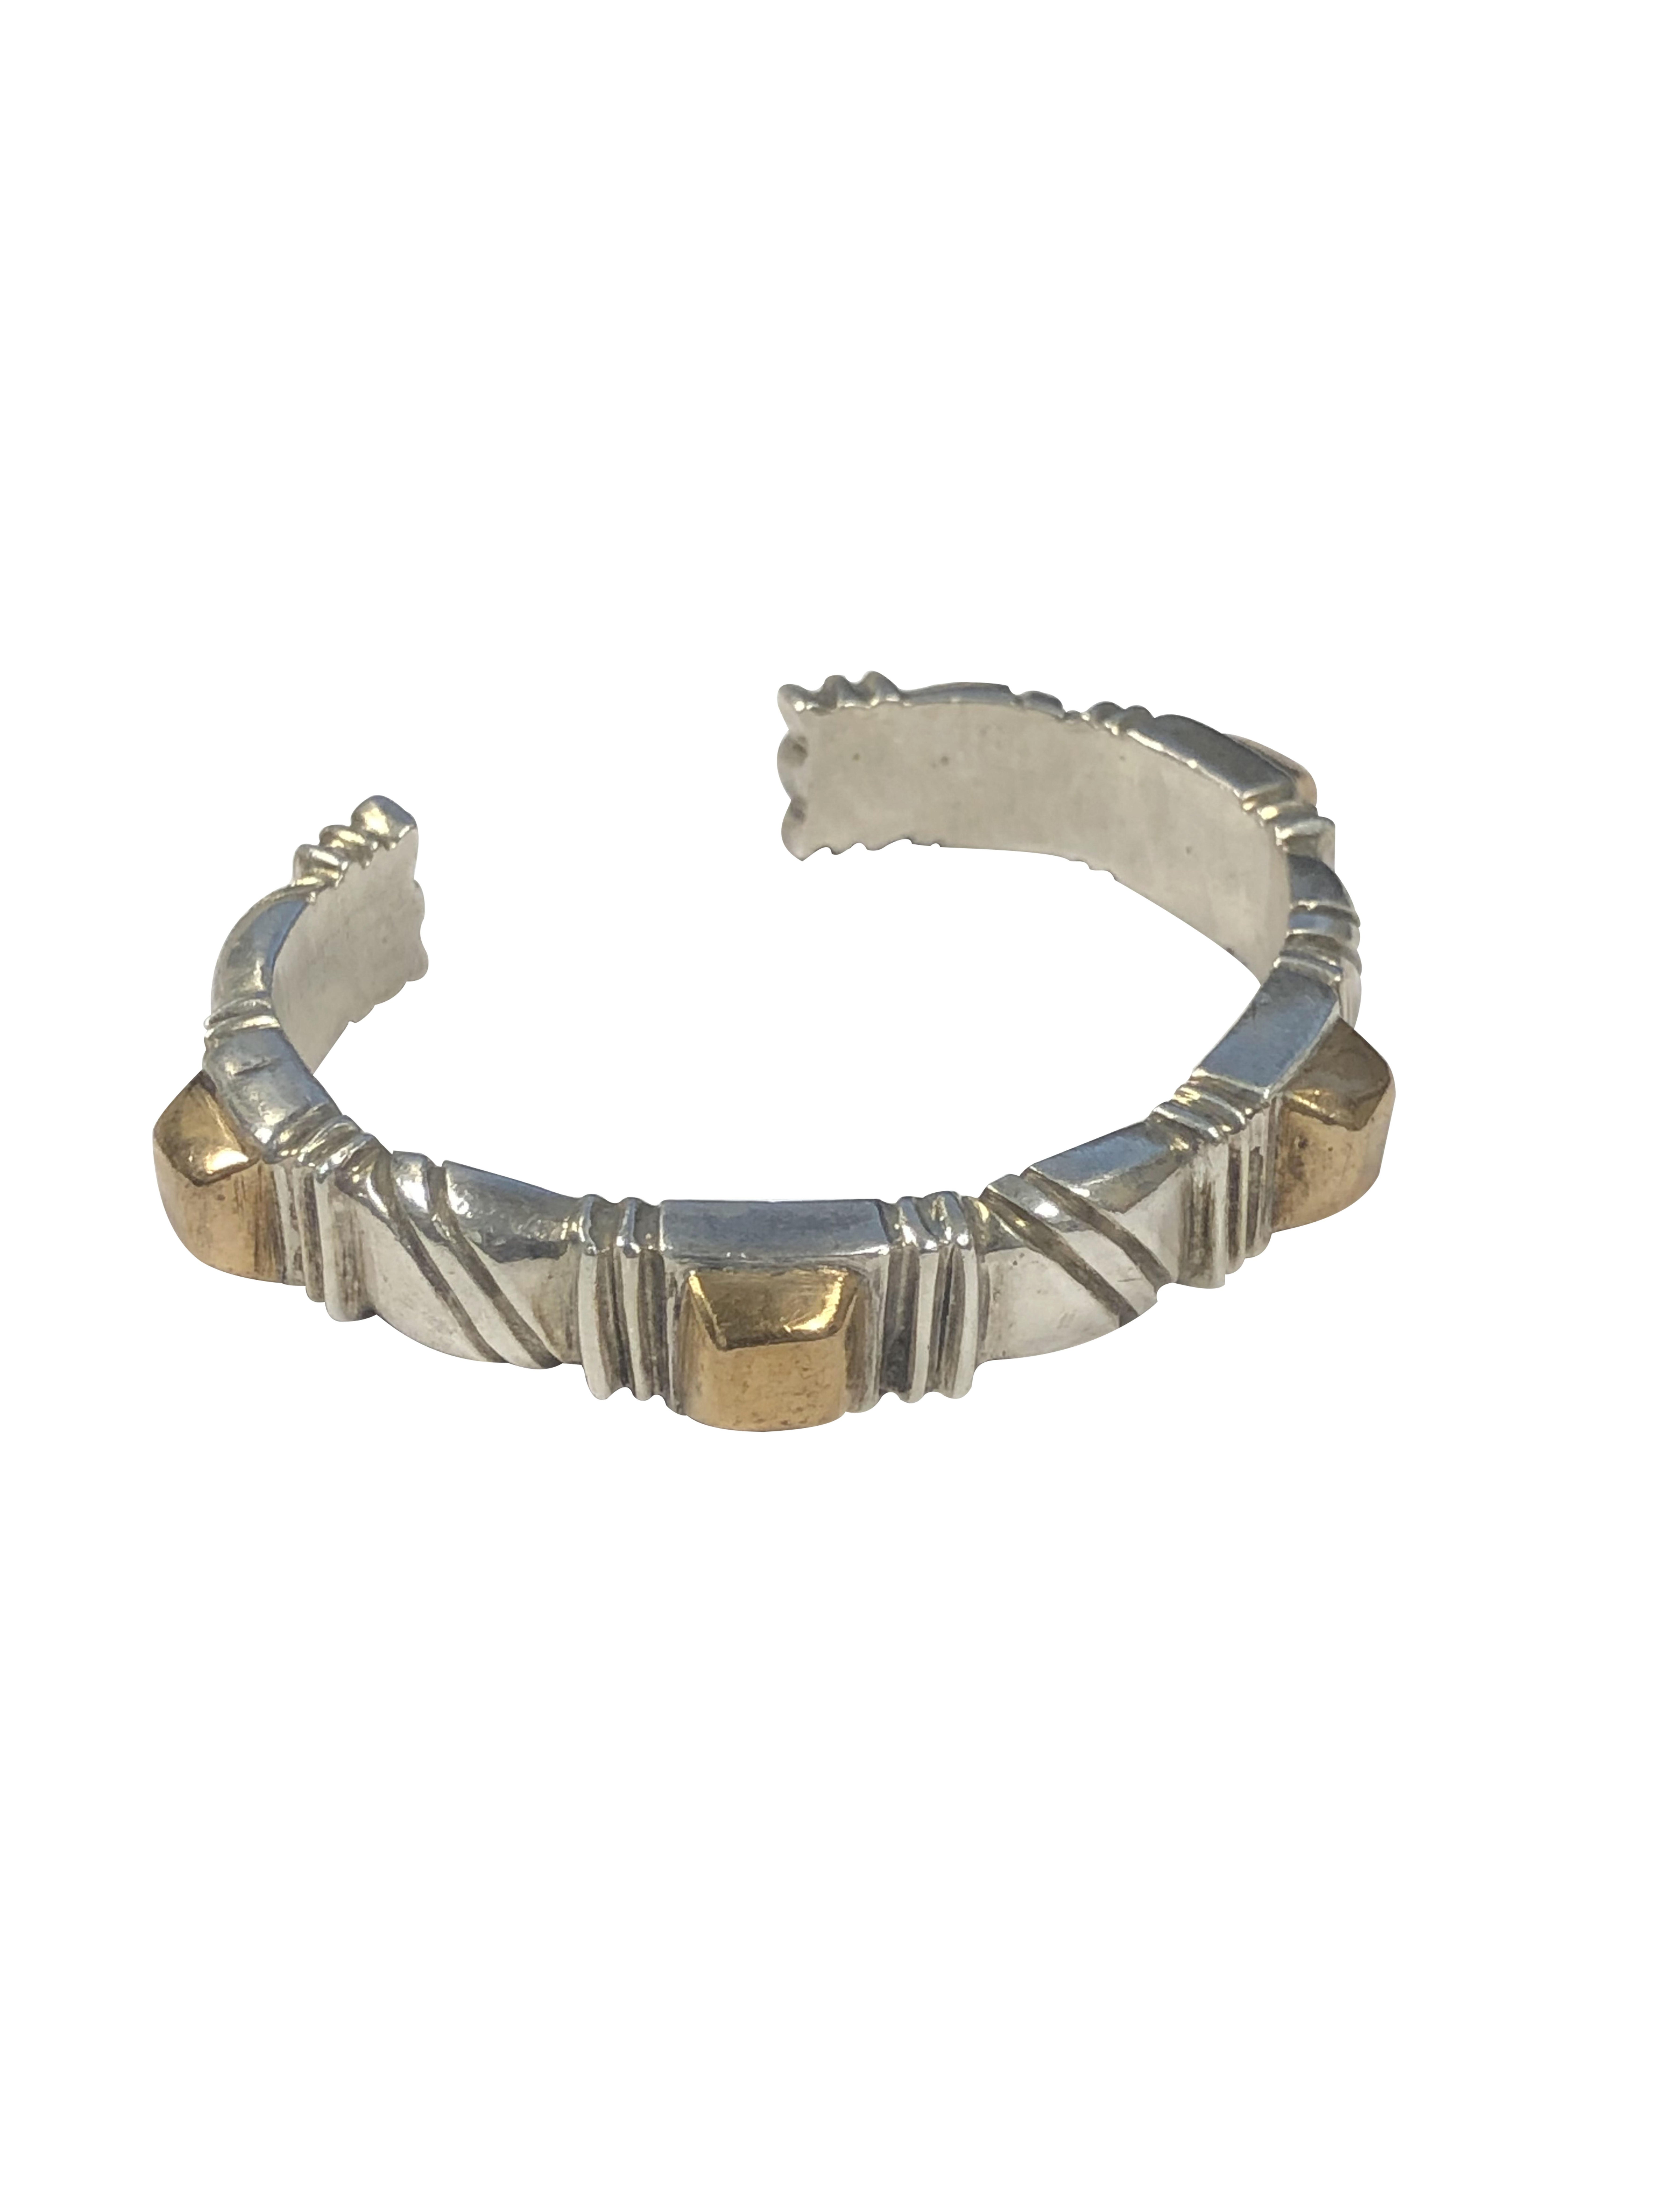 Circa 1960 William Spratling Sterling Silver Cuff Bracelet measuring 3/8 inch wide and having raised Gold Pyramid accents. Inside measurements 5 3/4 inches with a 1 inch opening.